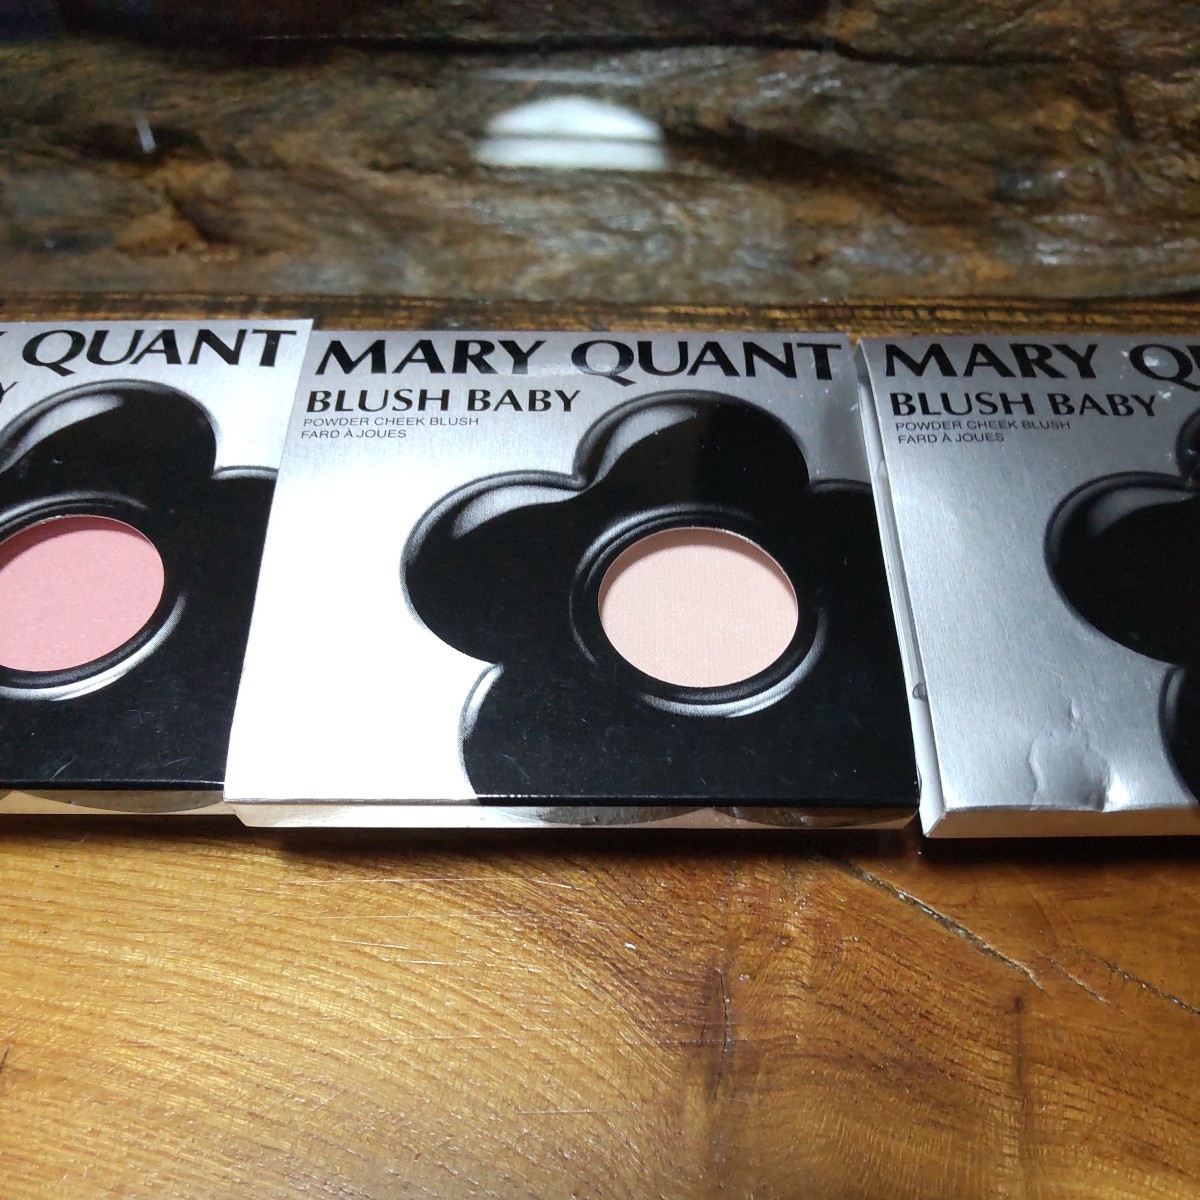  Mary Quant MARY QUANT brush baby 04 09 cheeks color re Phil 3 point 